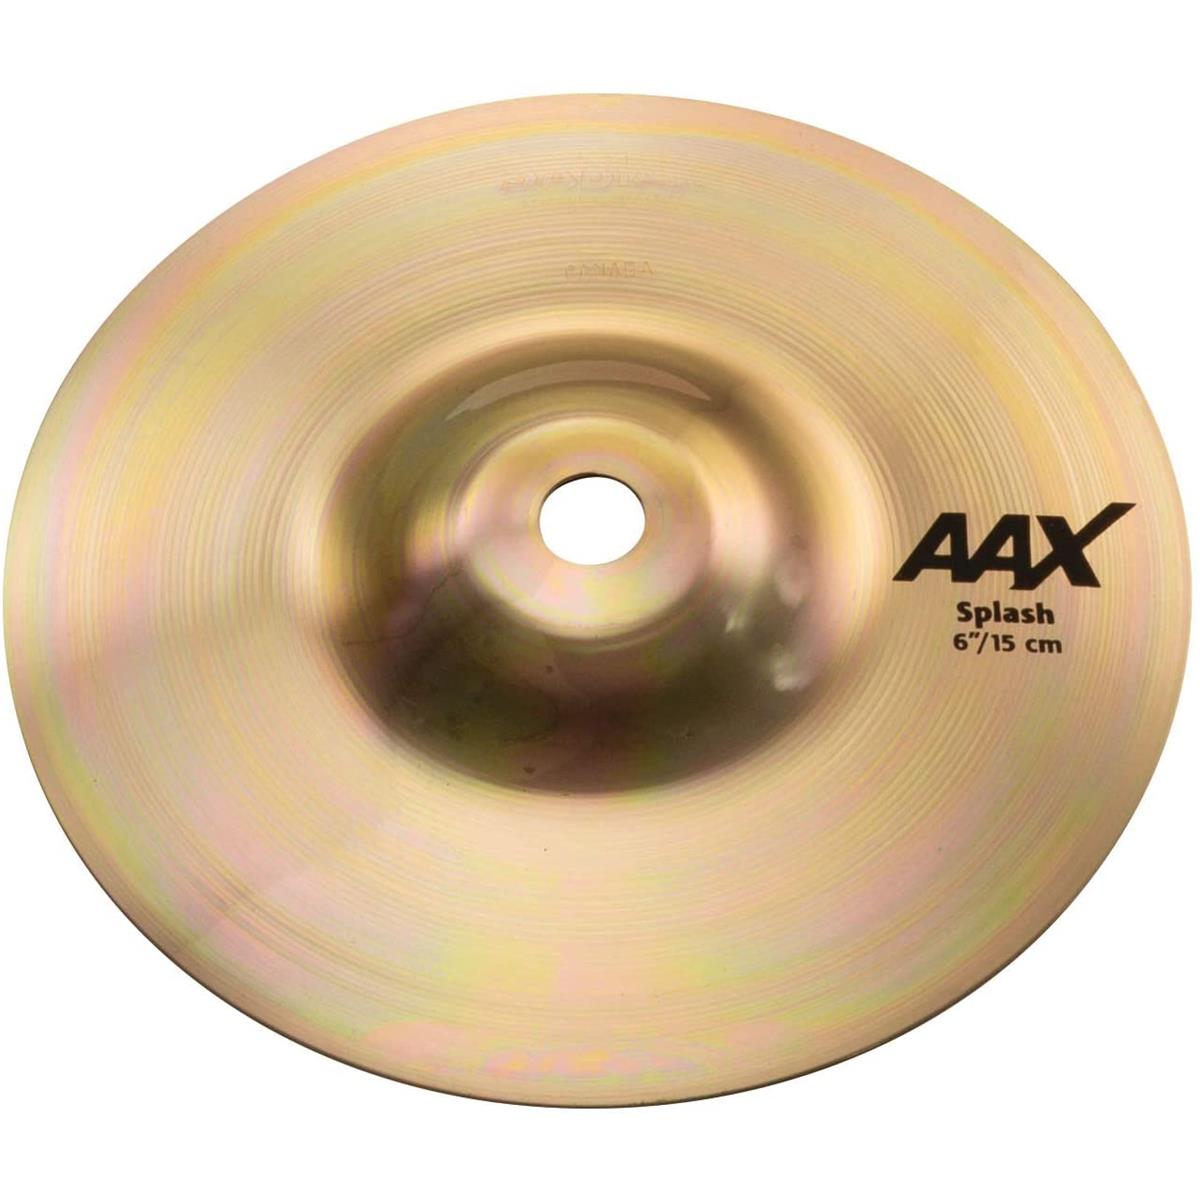 Sabian 6" AAX Splash Cymbal, Extra-Thin, Brilliant Finish Extremely fast and very bright, the SABIAN 6" AAX Splash provides plenty of penetrating cut. The SABIAN AAX series delivers consistently bright, crisp, clear and cutting responses - AAX is the ultimate Modern Bright sound!